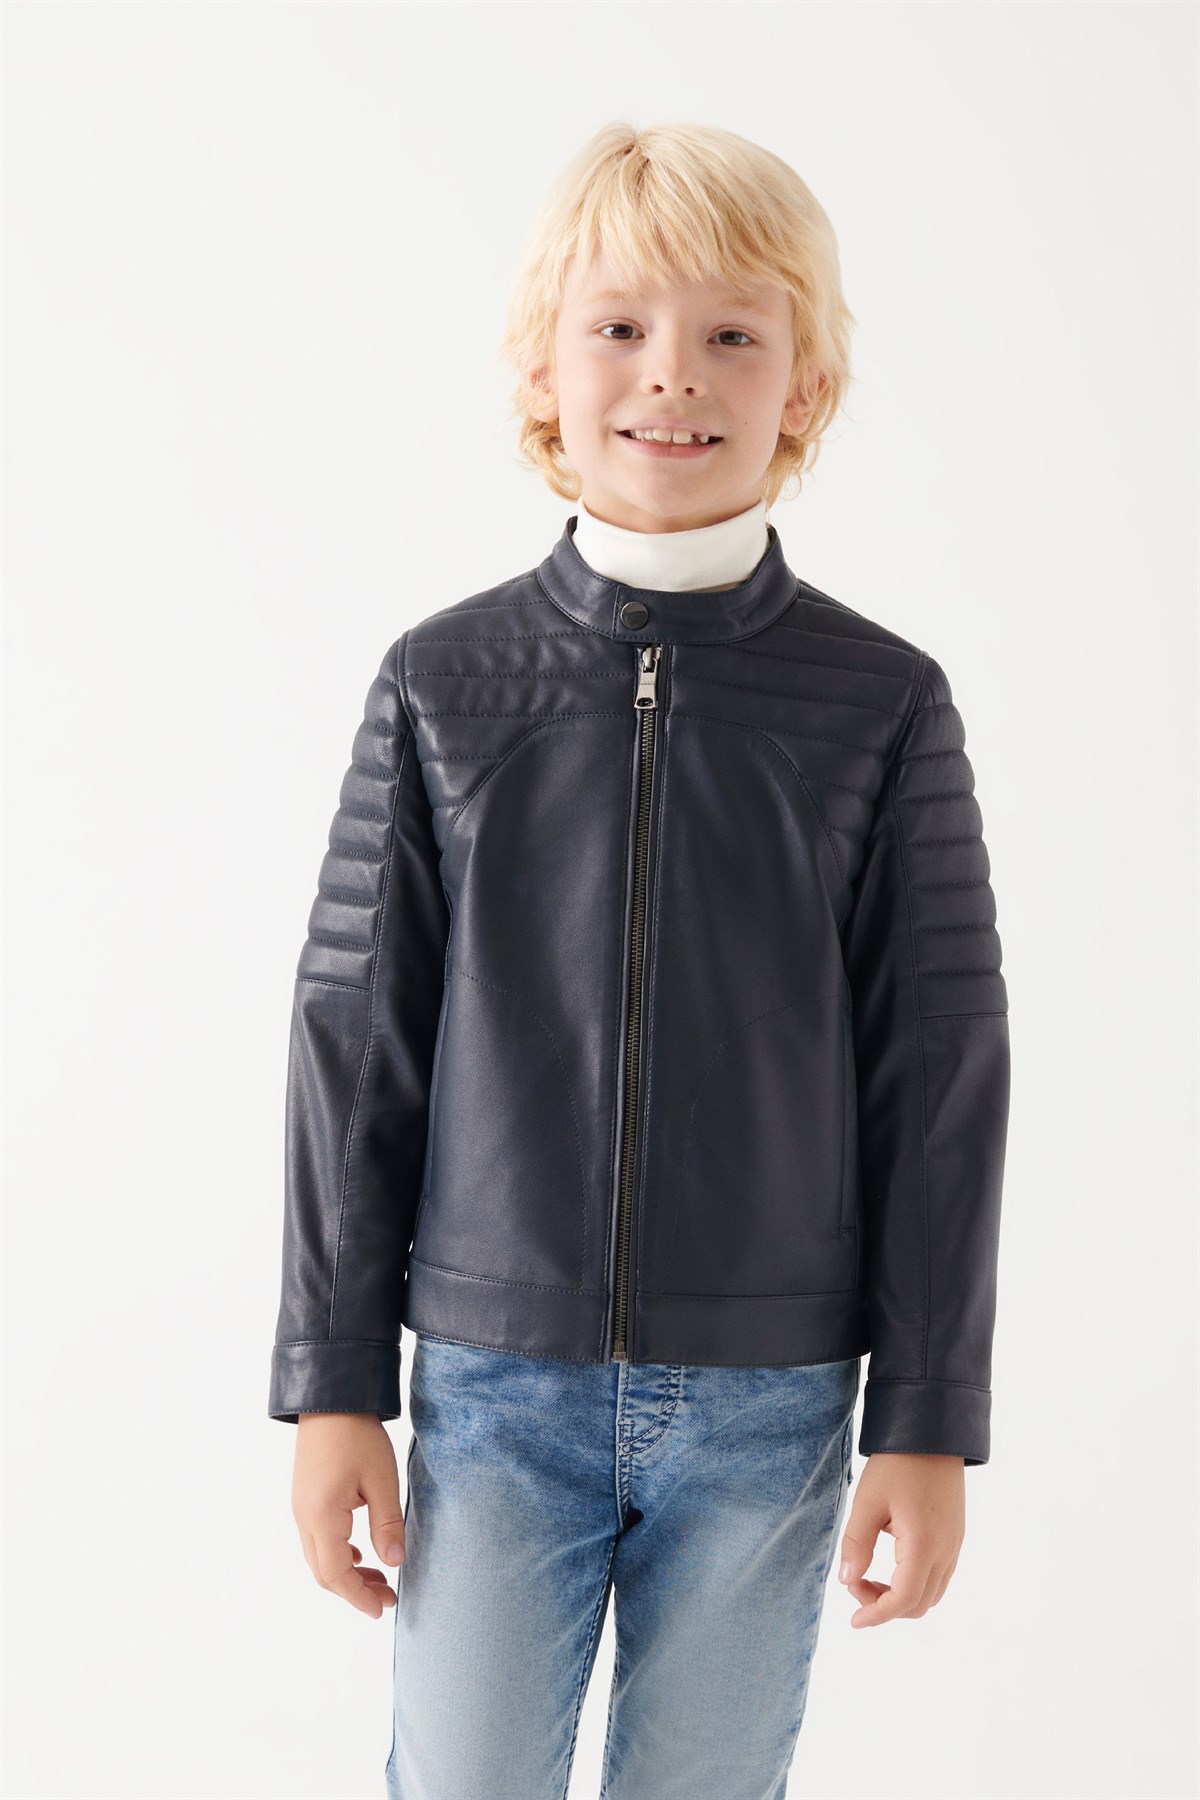 FRED Boys Navy Blue Leather Jacket | Boys Leather and Shearling Jacket ...